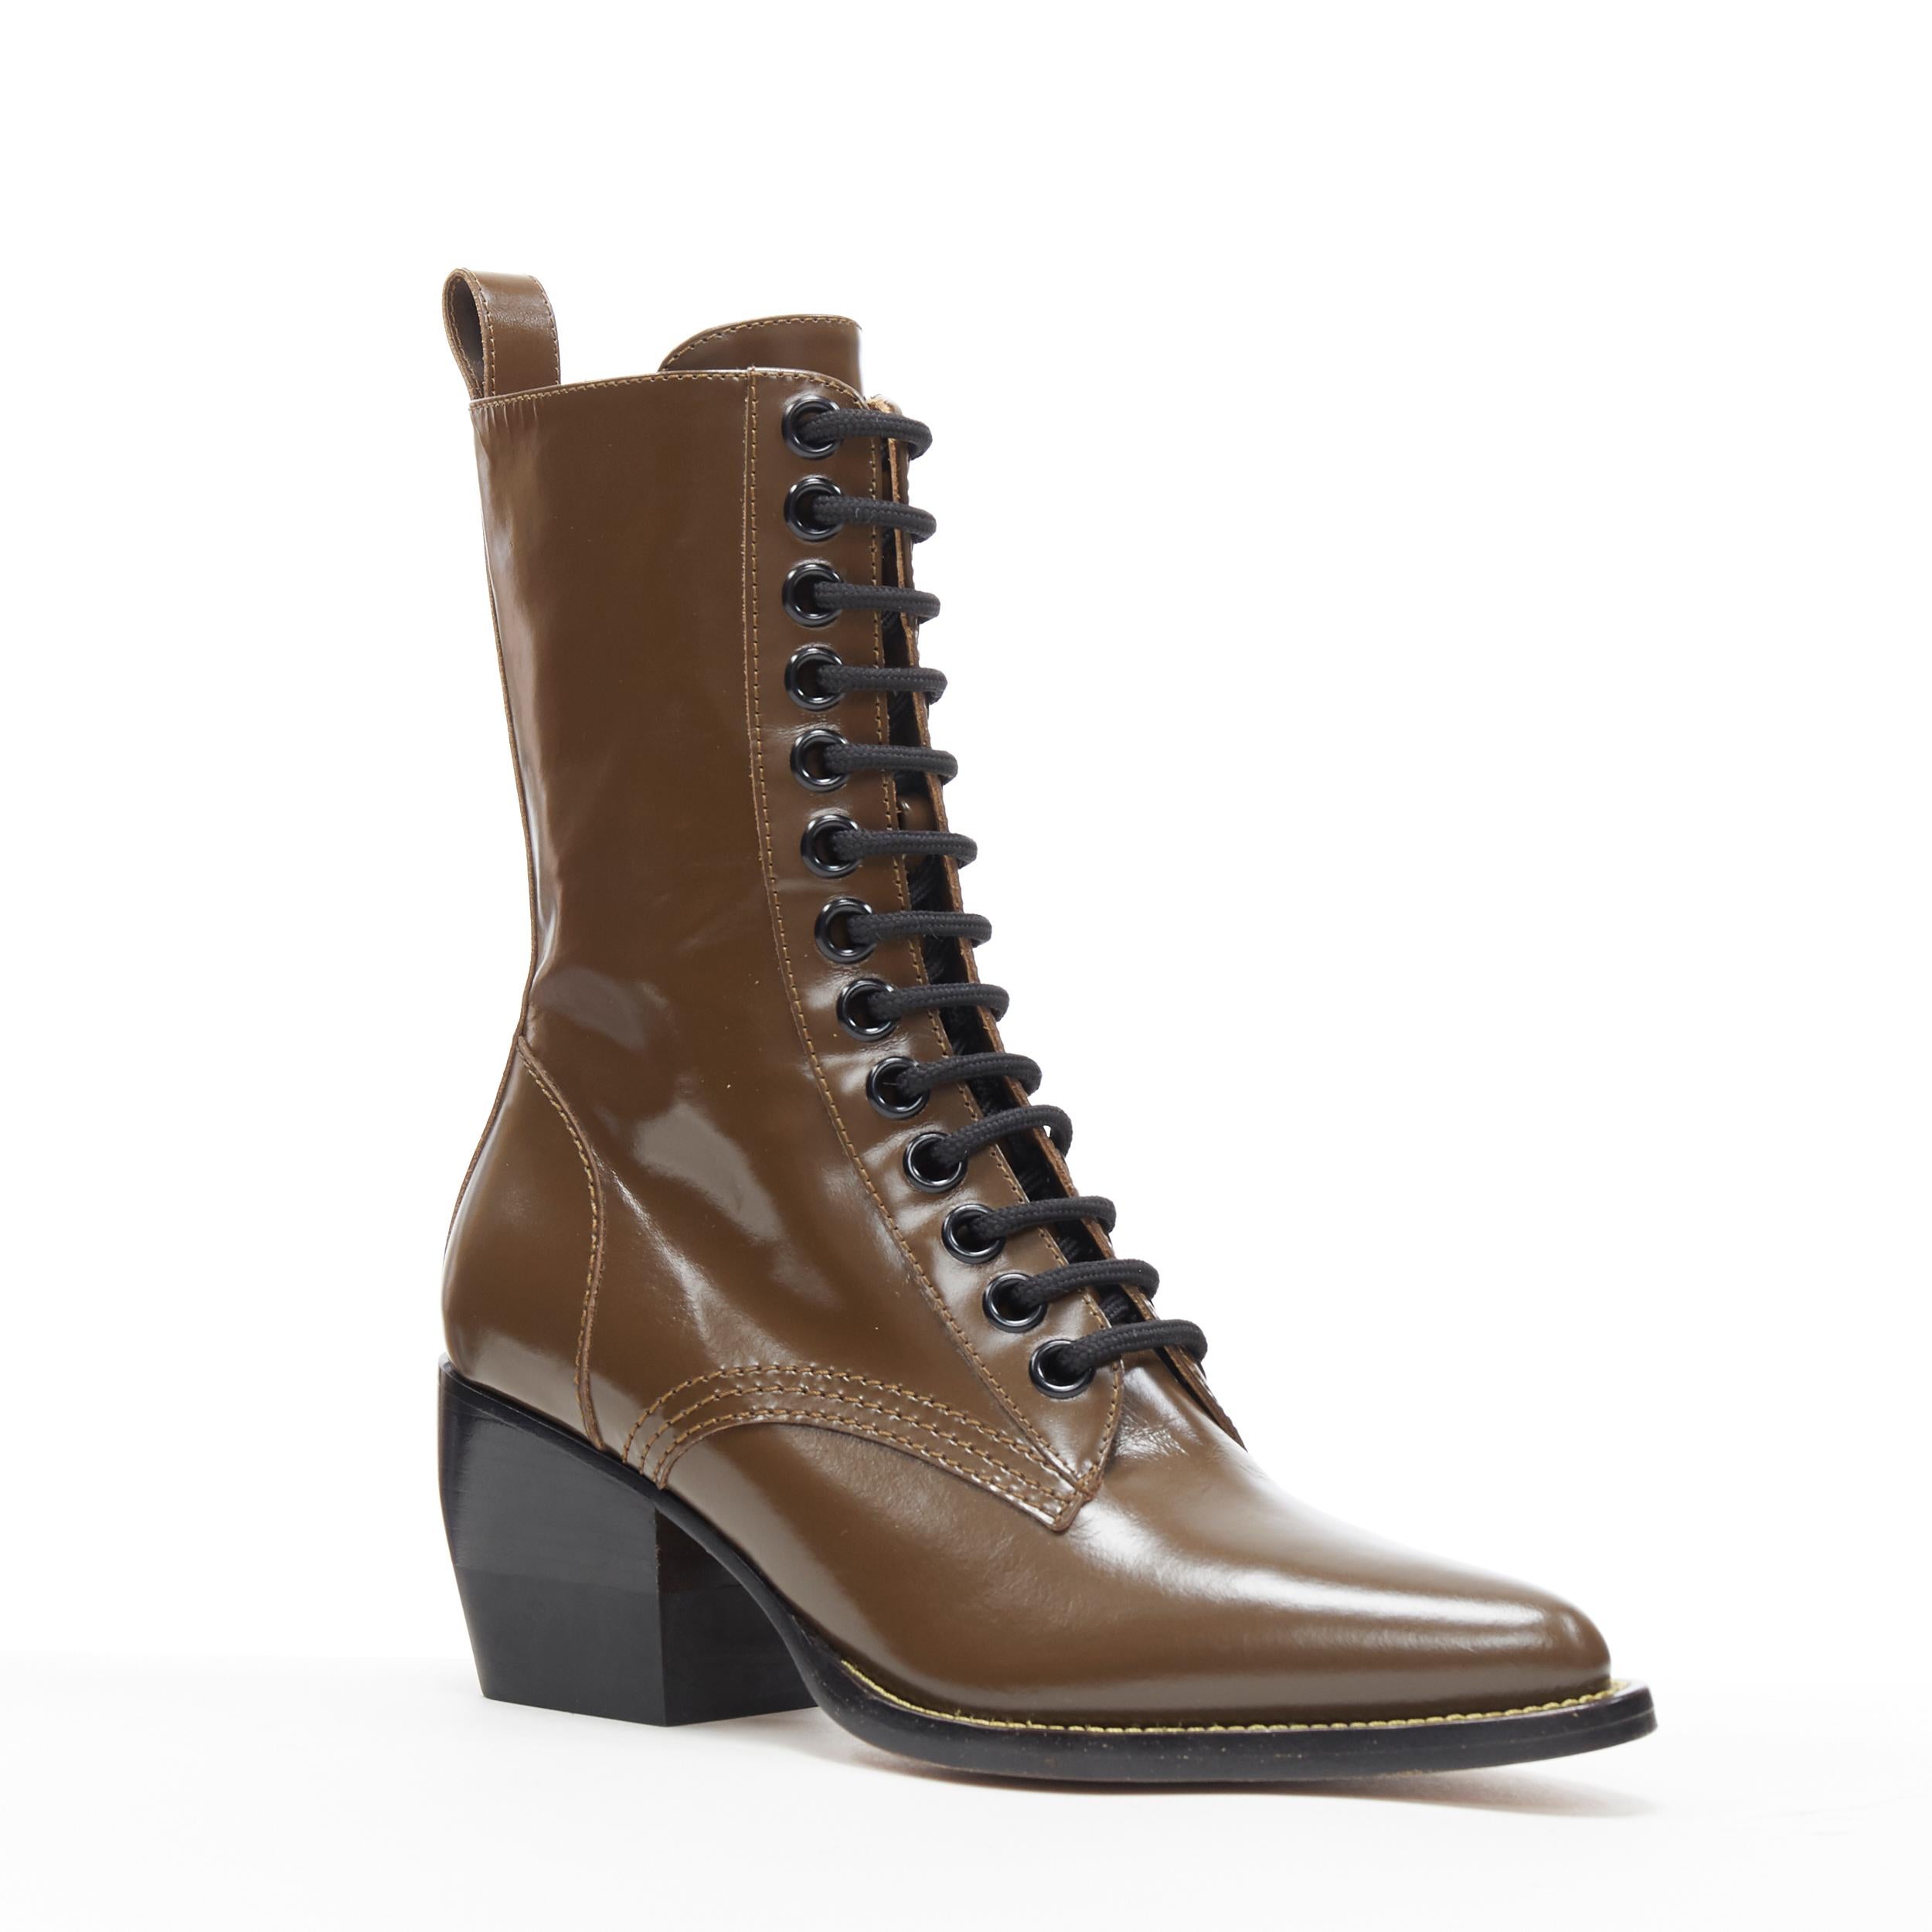 new CHLOE Runway Rylee army green leather block heel pointed toe boot EU36.5
Brand: Chloe
Model Name / Style: Rylee
Material: Leather
Color: Green
Pattern: Solid
Closure: Lace up
Extra Detail: Signature Runway Rylee boots by Chloe. Ankle boots. Army